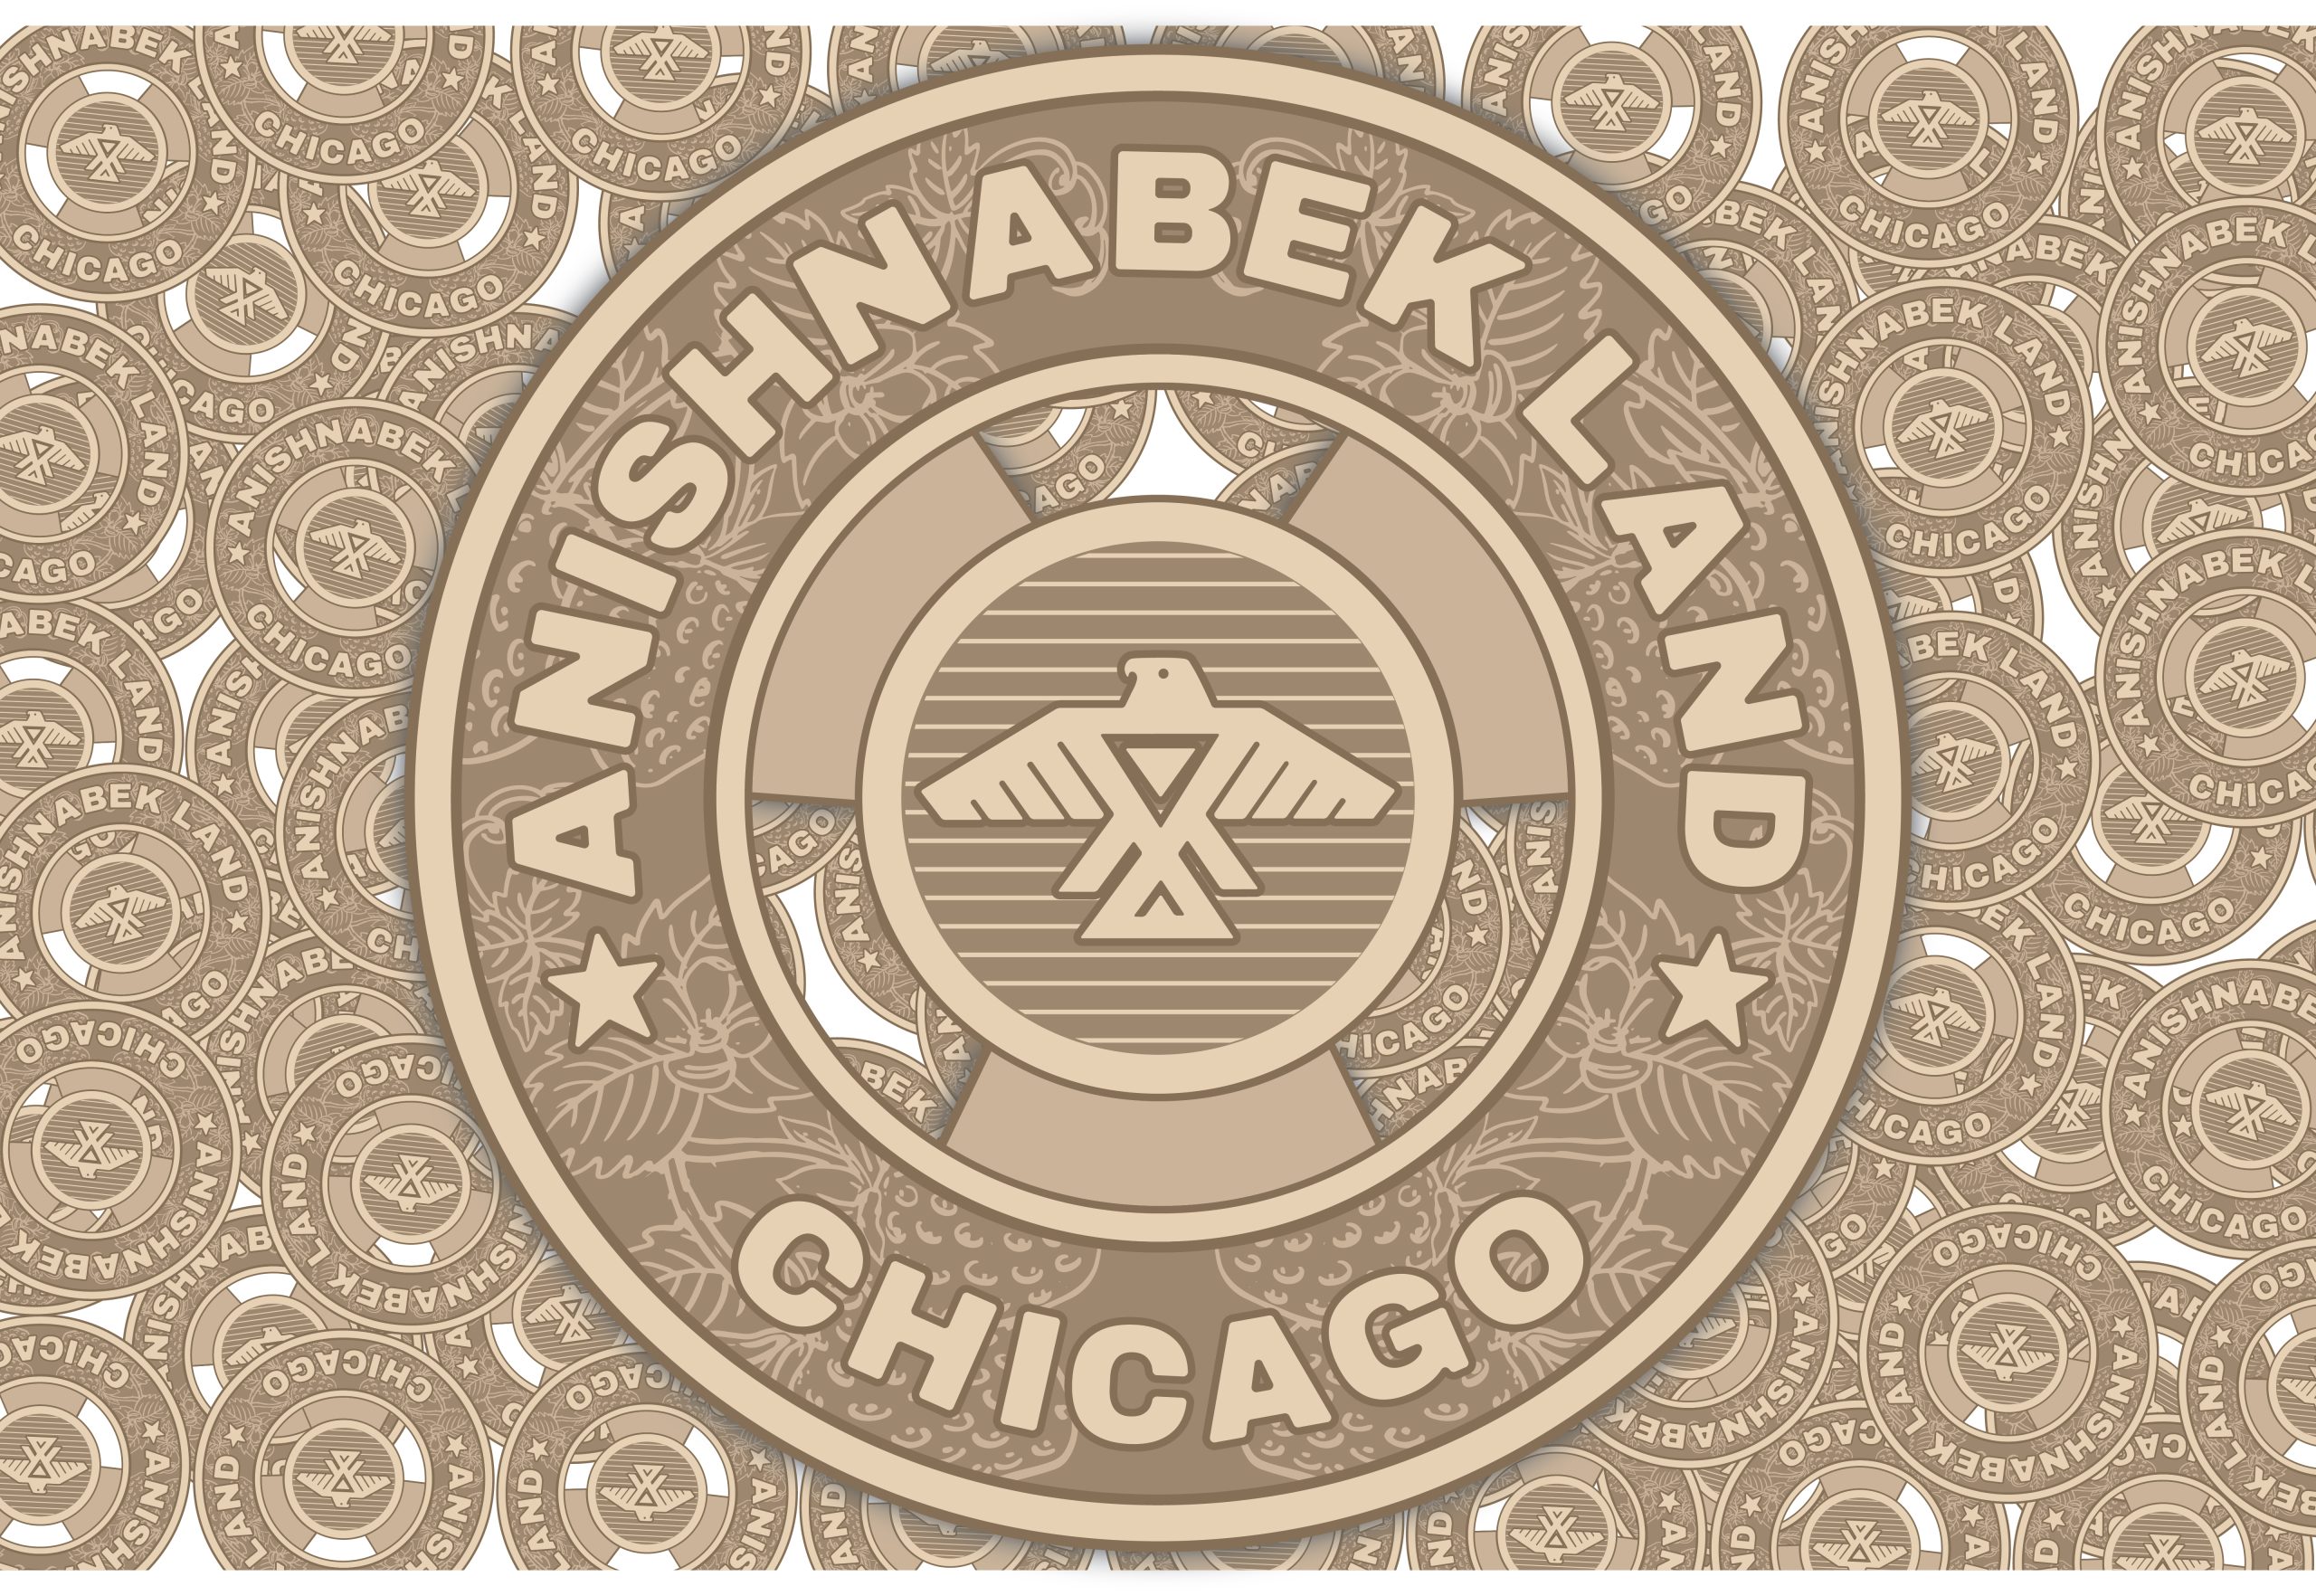 Image: A beige and tan graphic is based on the CTA fare token. The token reads: "ANISHINAABEK LAND CHICAGO" and has the Anishinaabe Thunderbird in the center. Graphic created by David Bernie.